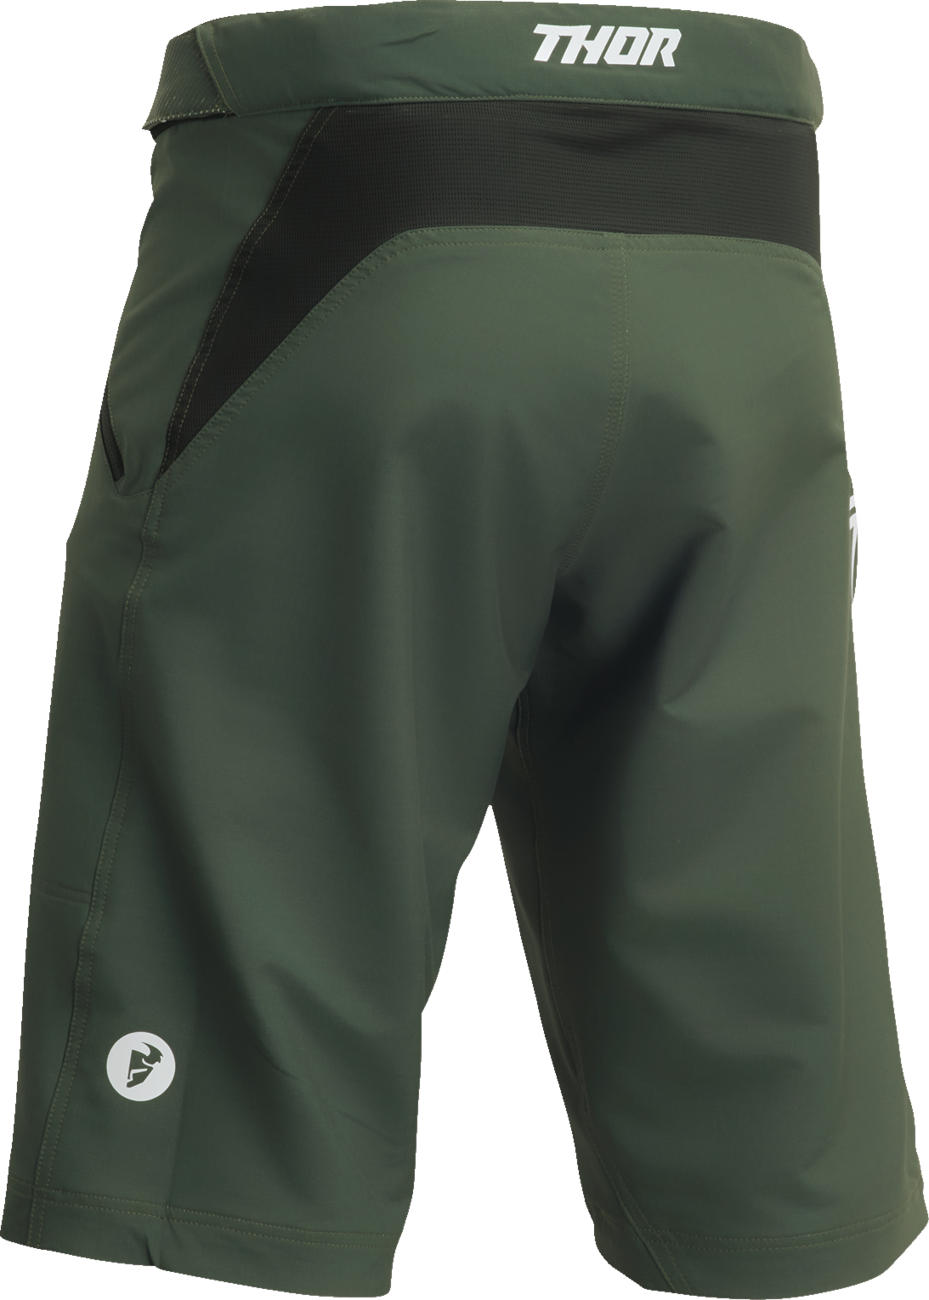 THOR Intense Shorts - Forest Green - US 32 5001-0290